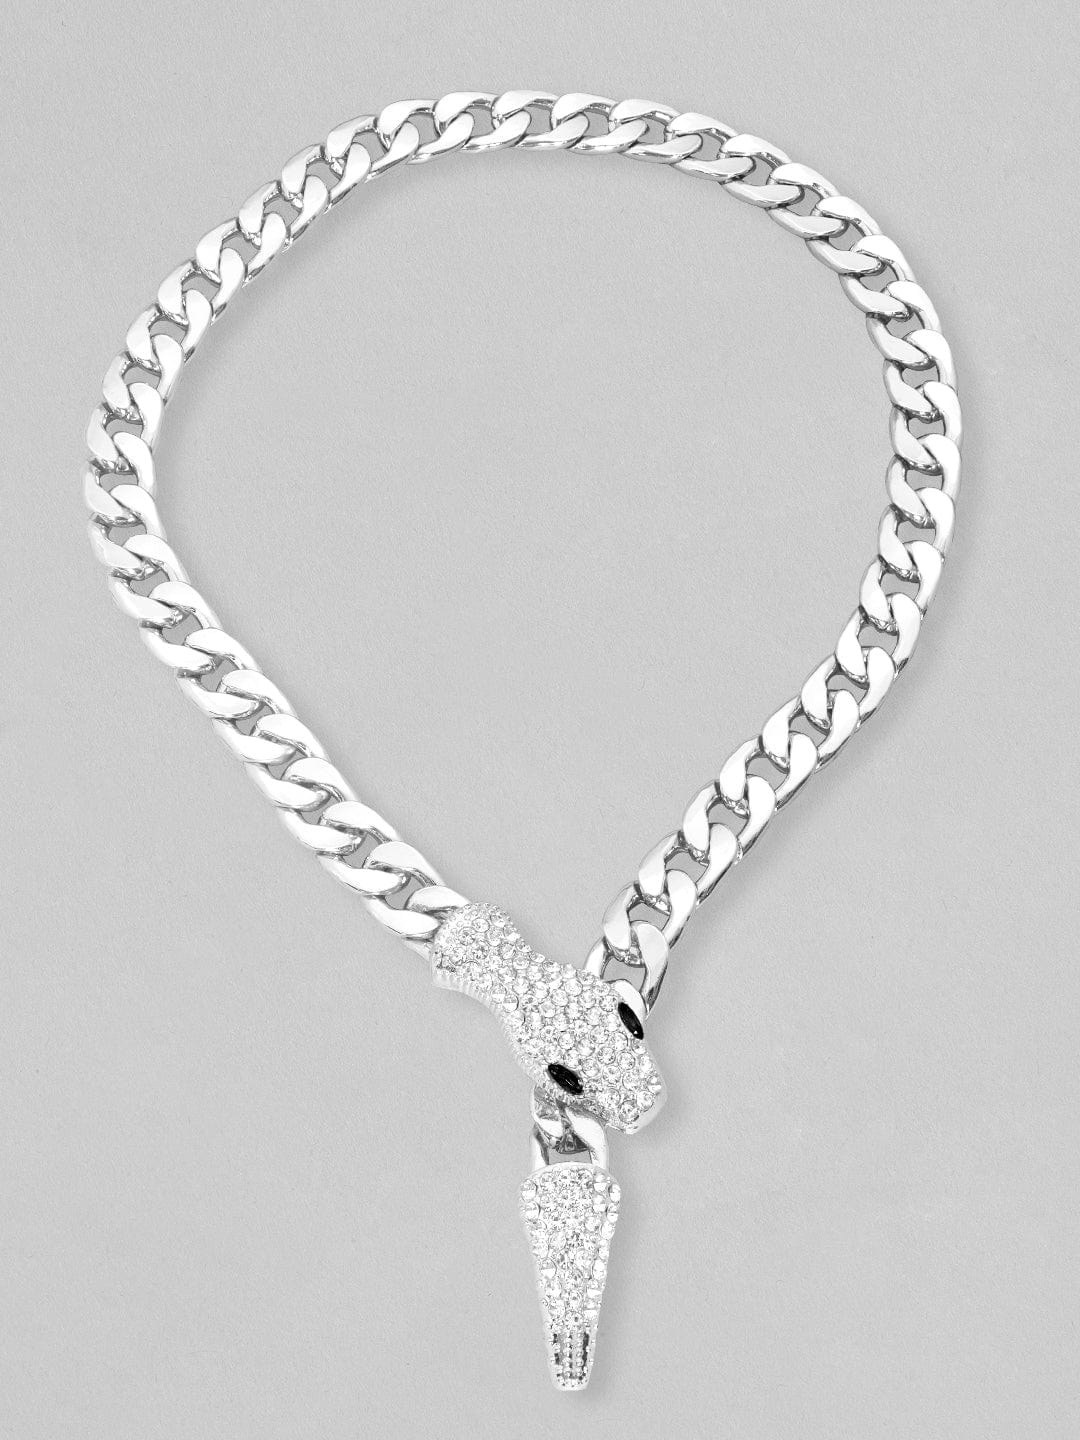 Rubans Voguish Silver Toned Link Style Serpent Chain With Zircon Stones Studded. Chain & Necklaces